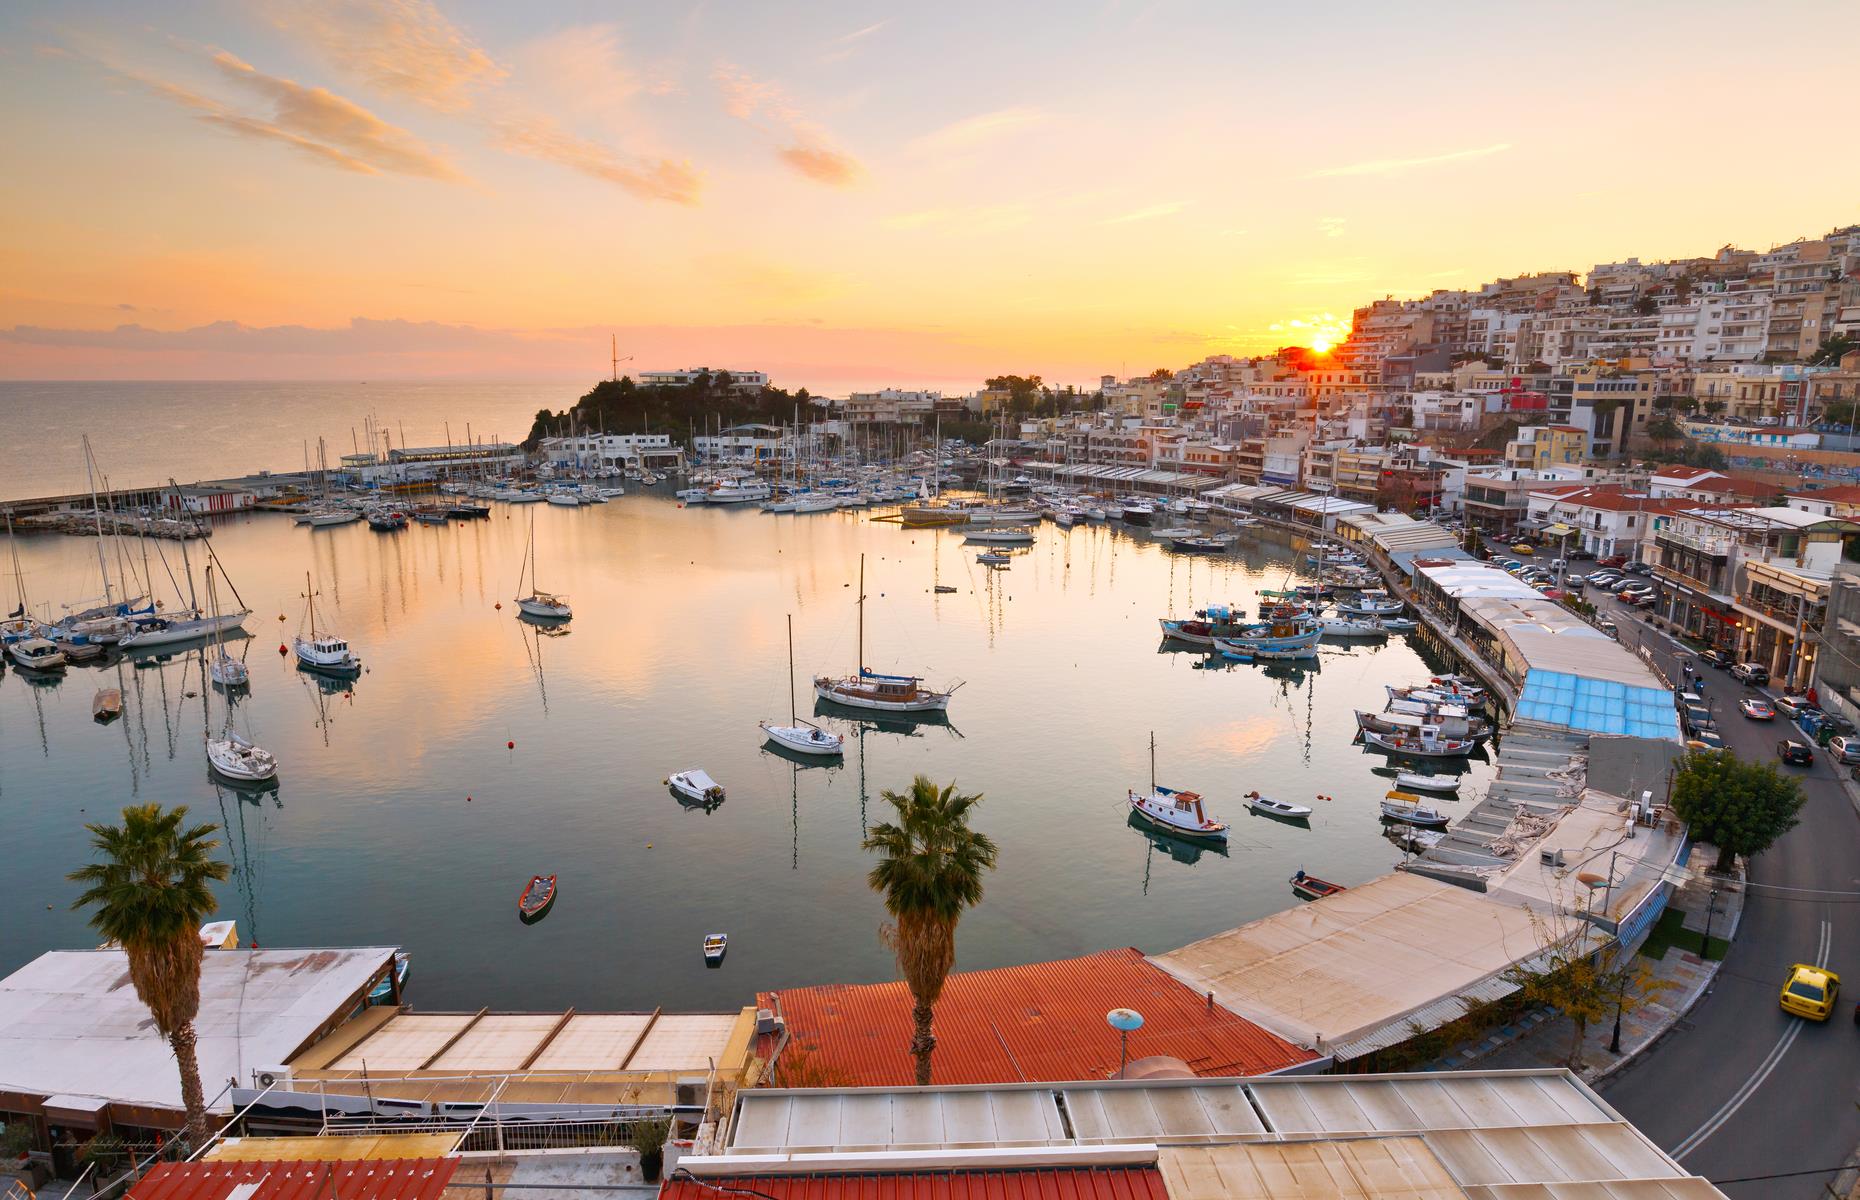 <p>Around six miles from Athens lies the small town of Piraeus, where you’ll find a picturesque marina which is frequented by both fishing boats and luxury yachts. You wouldn’t believe that Piraeus port, the busiest port in Greece, is located just on the other side of this gentle little harbor.</p>